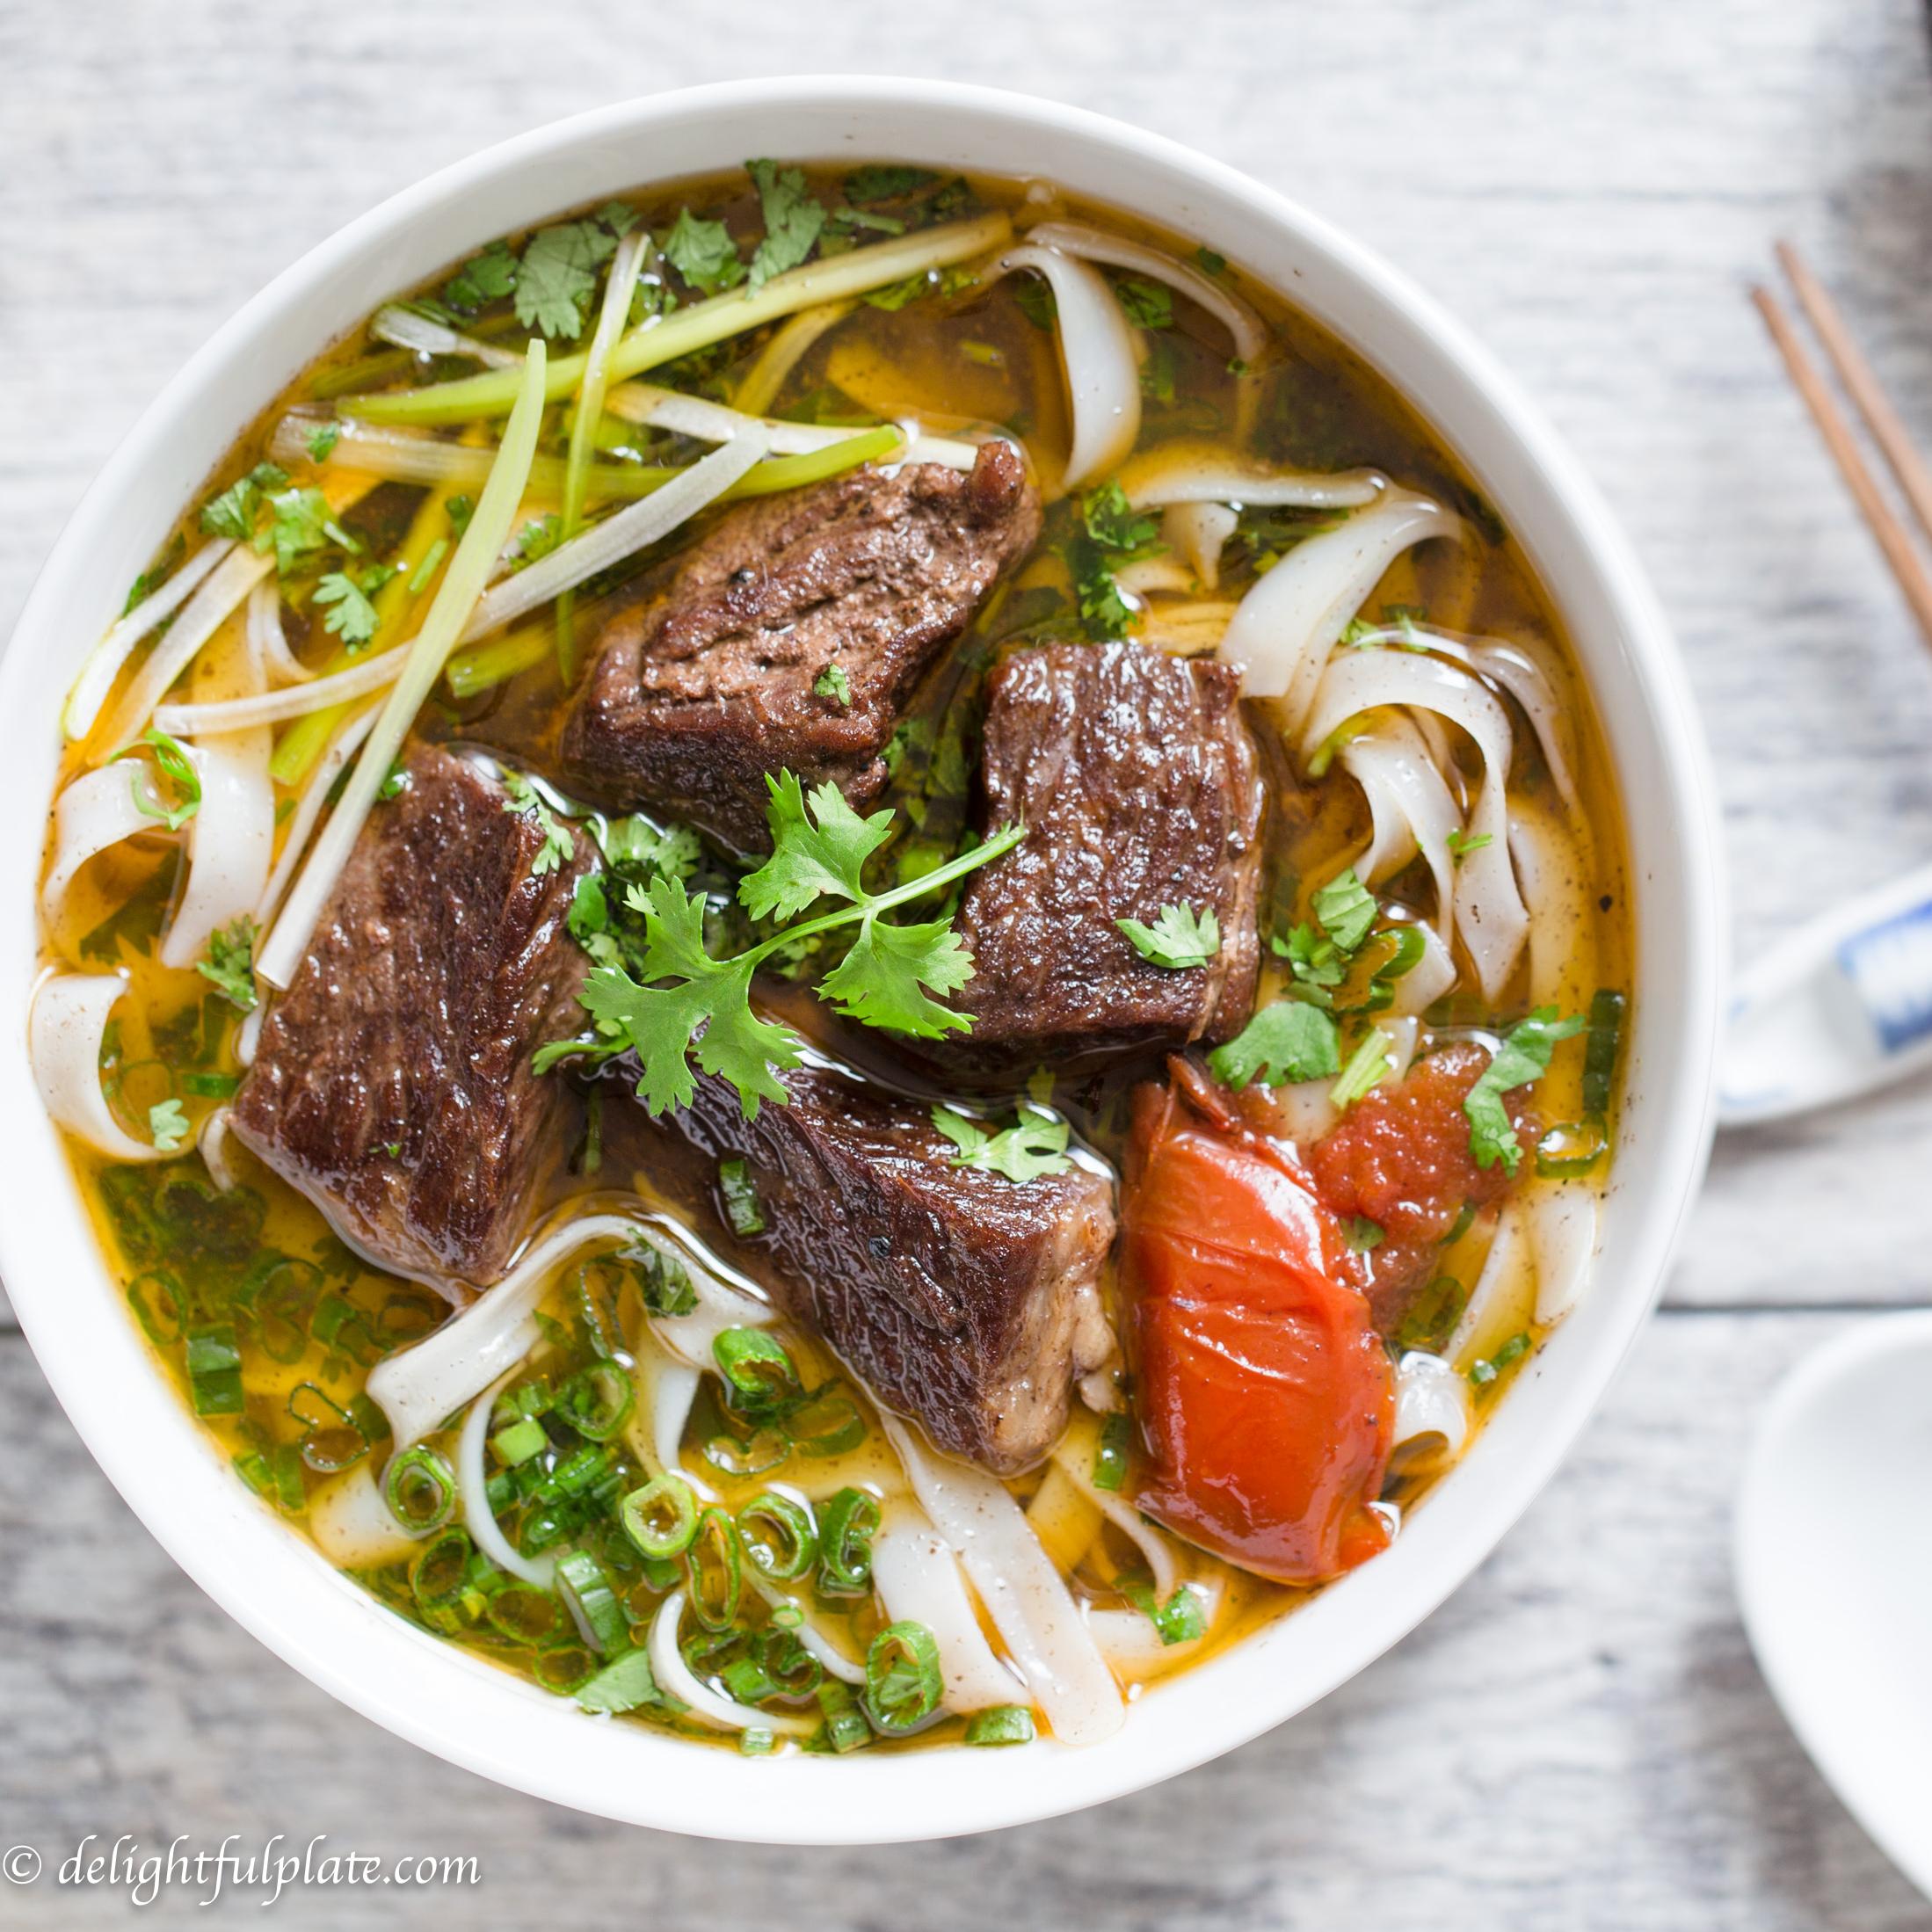  The epitome of Vietnamese comfort food.